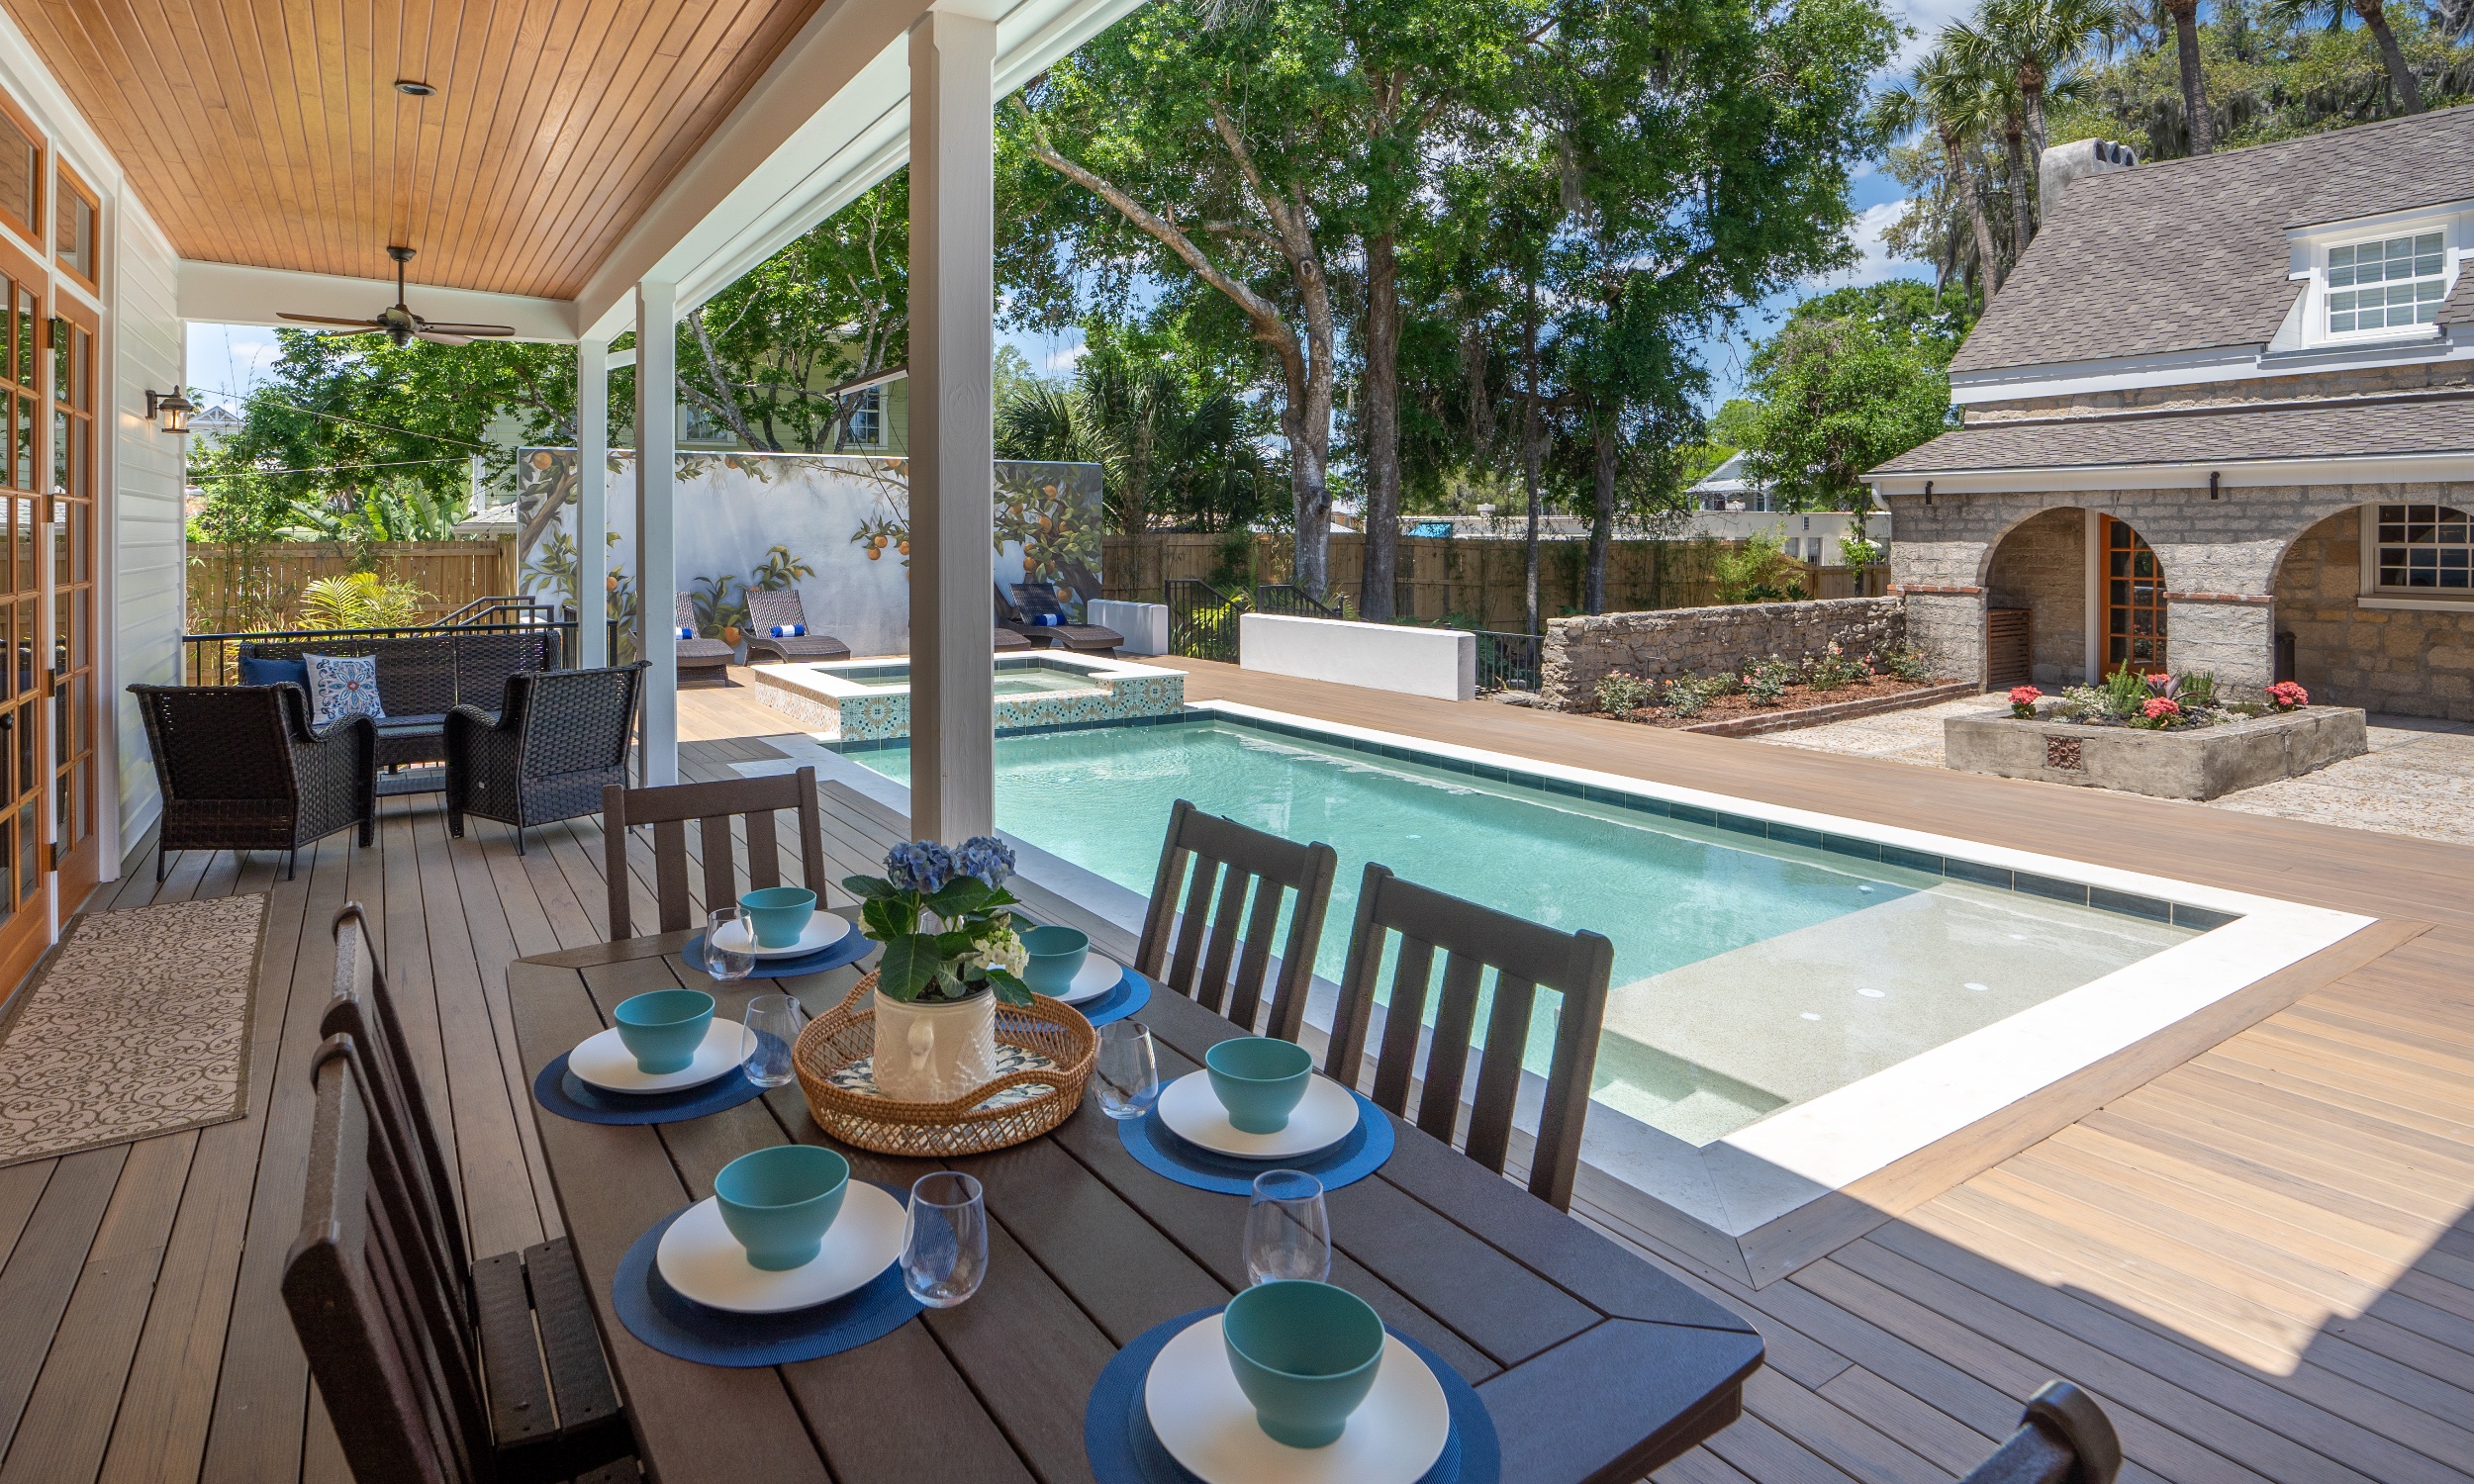 A dining porch and pool deck in a restored historic property on a sunny day